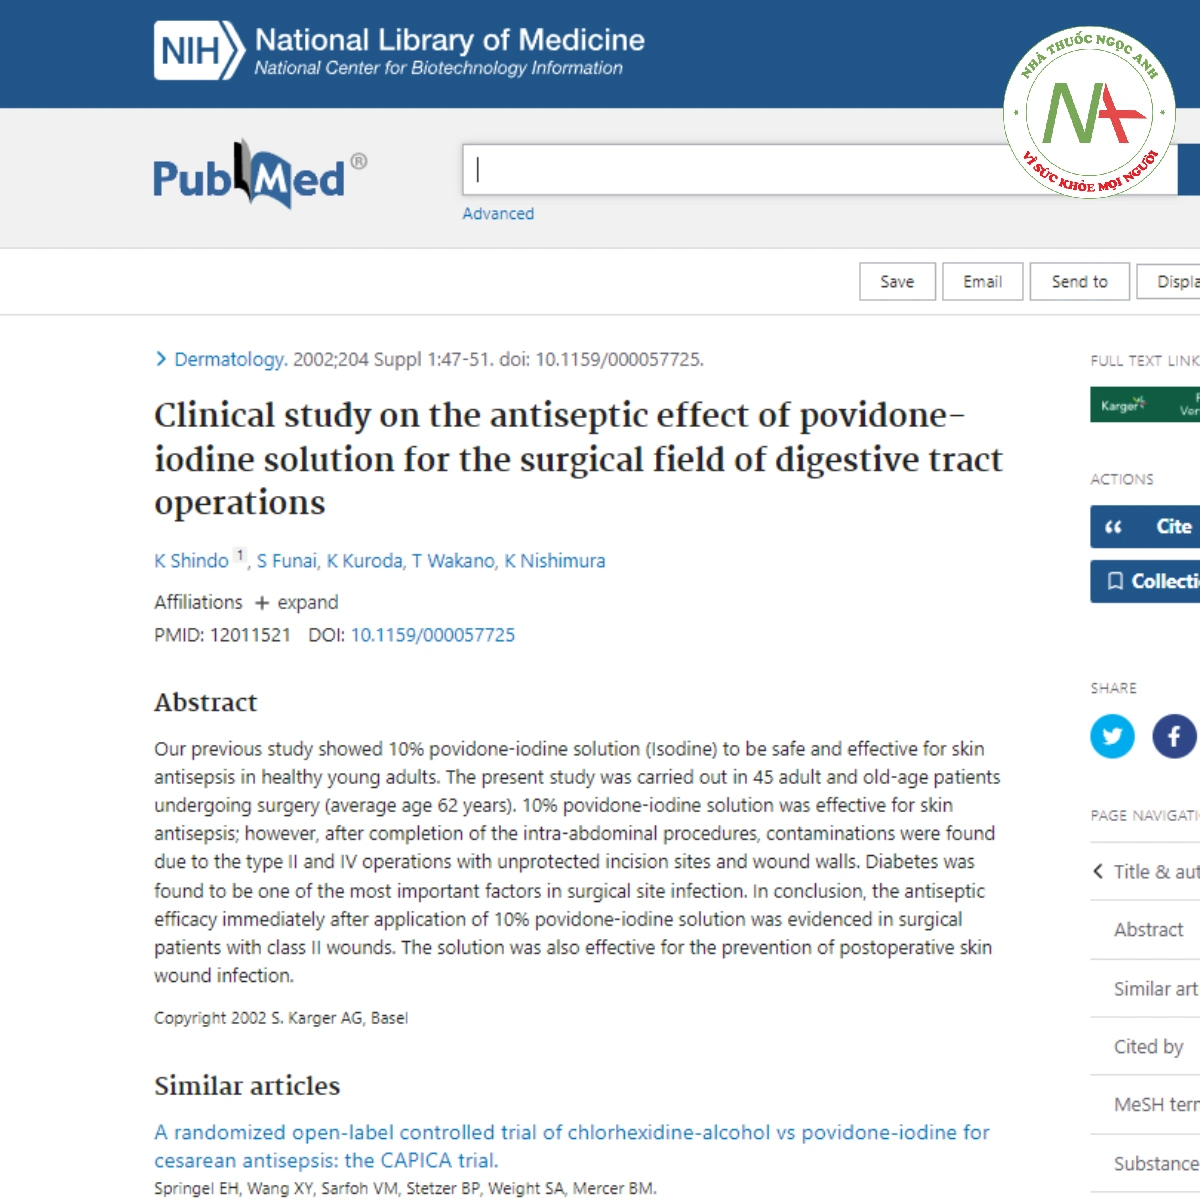 Clinical study on the antiseptic effect of povidone-iodine solution for the surgical field of digestive tract operations